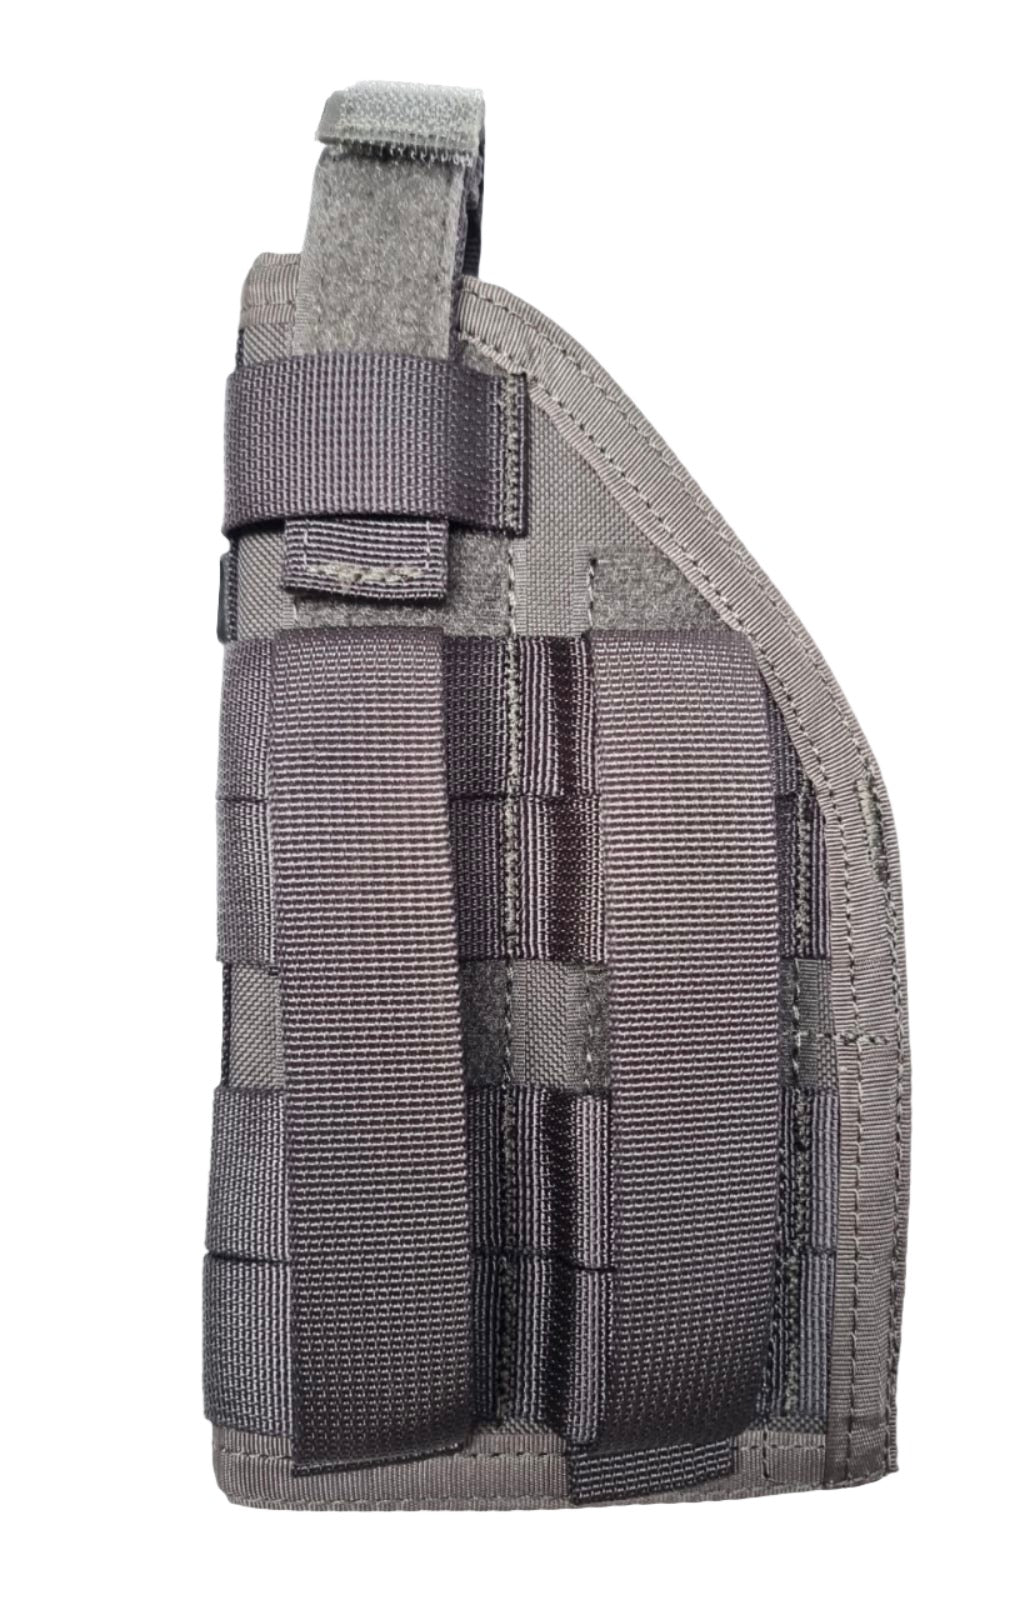 SHE-714 Camouflage Molle Pistol Holster Colour Grey.